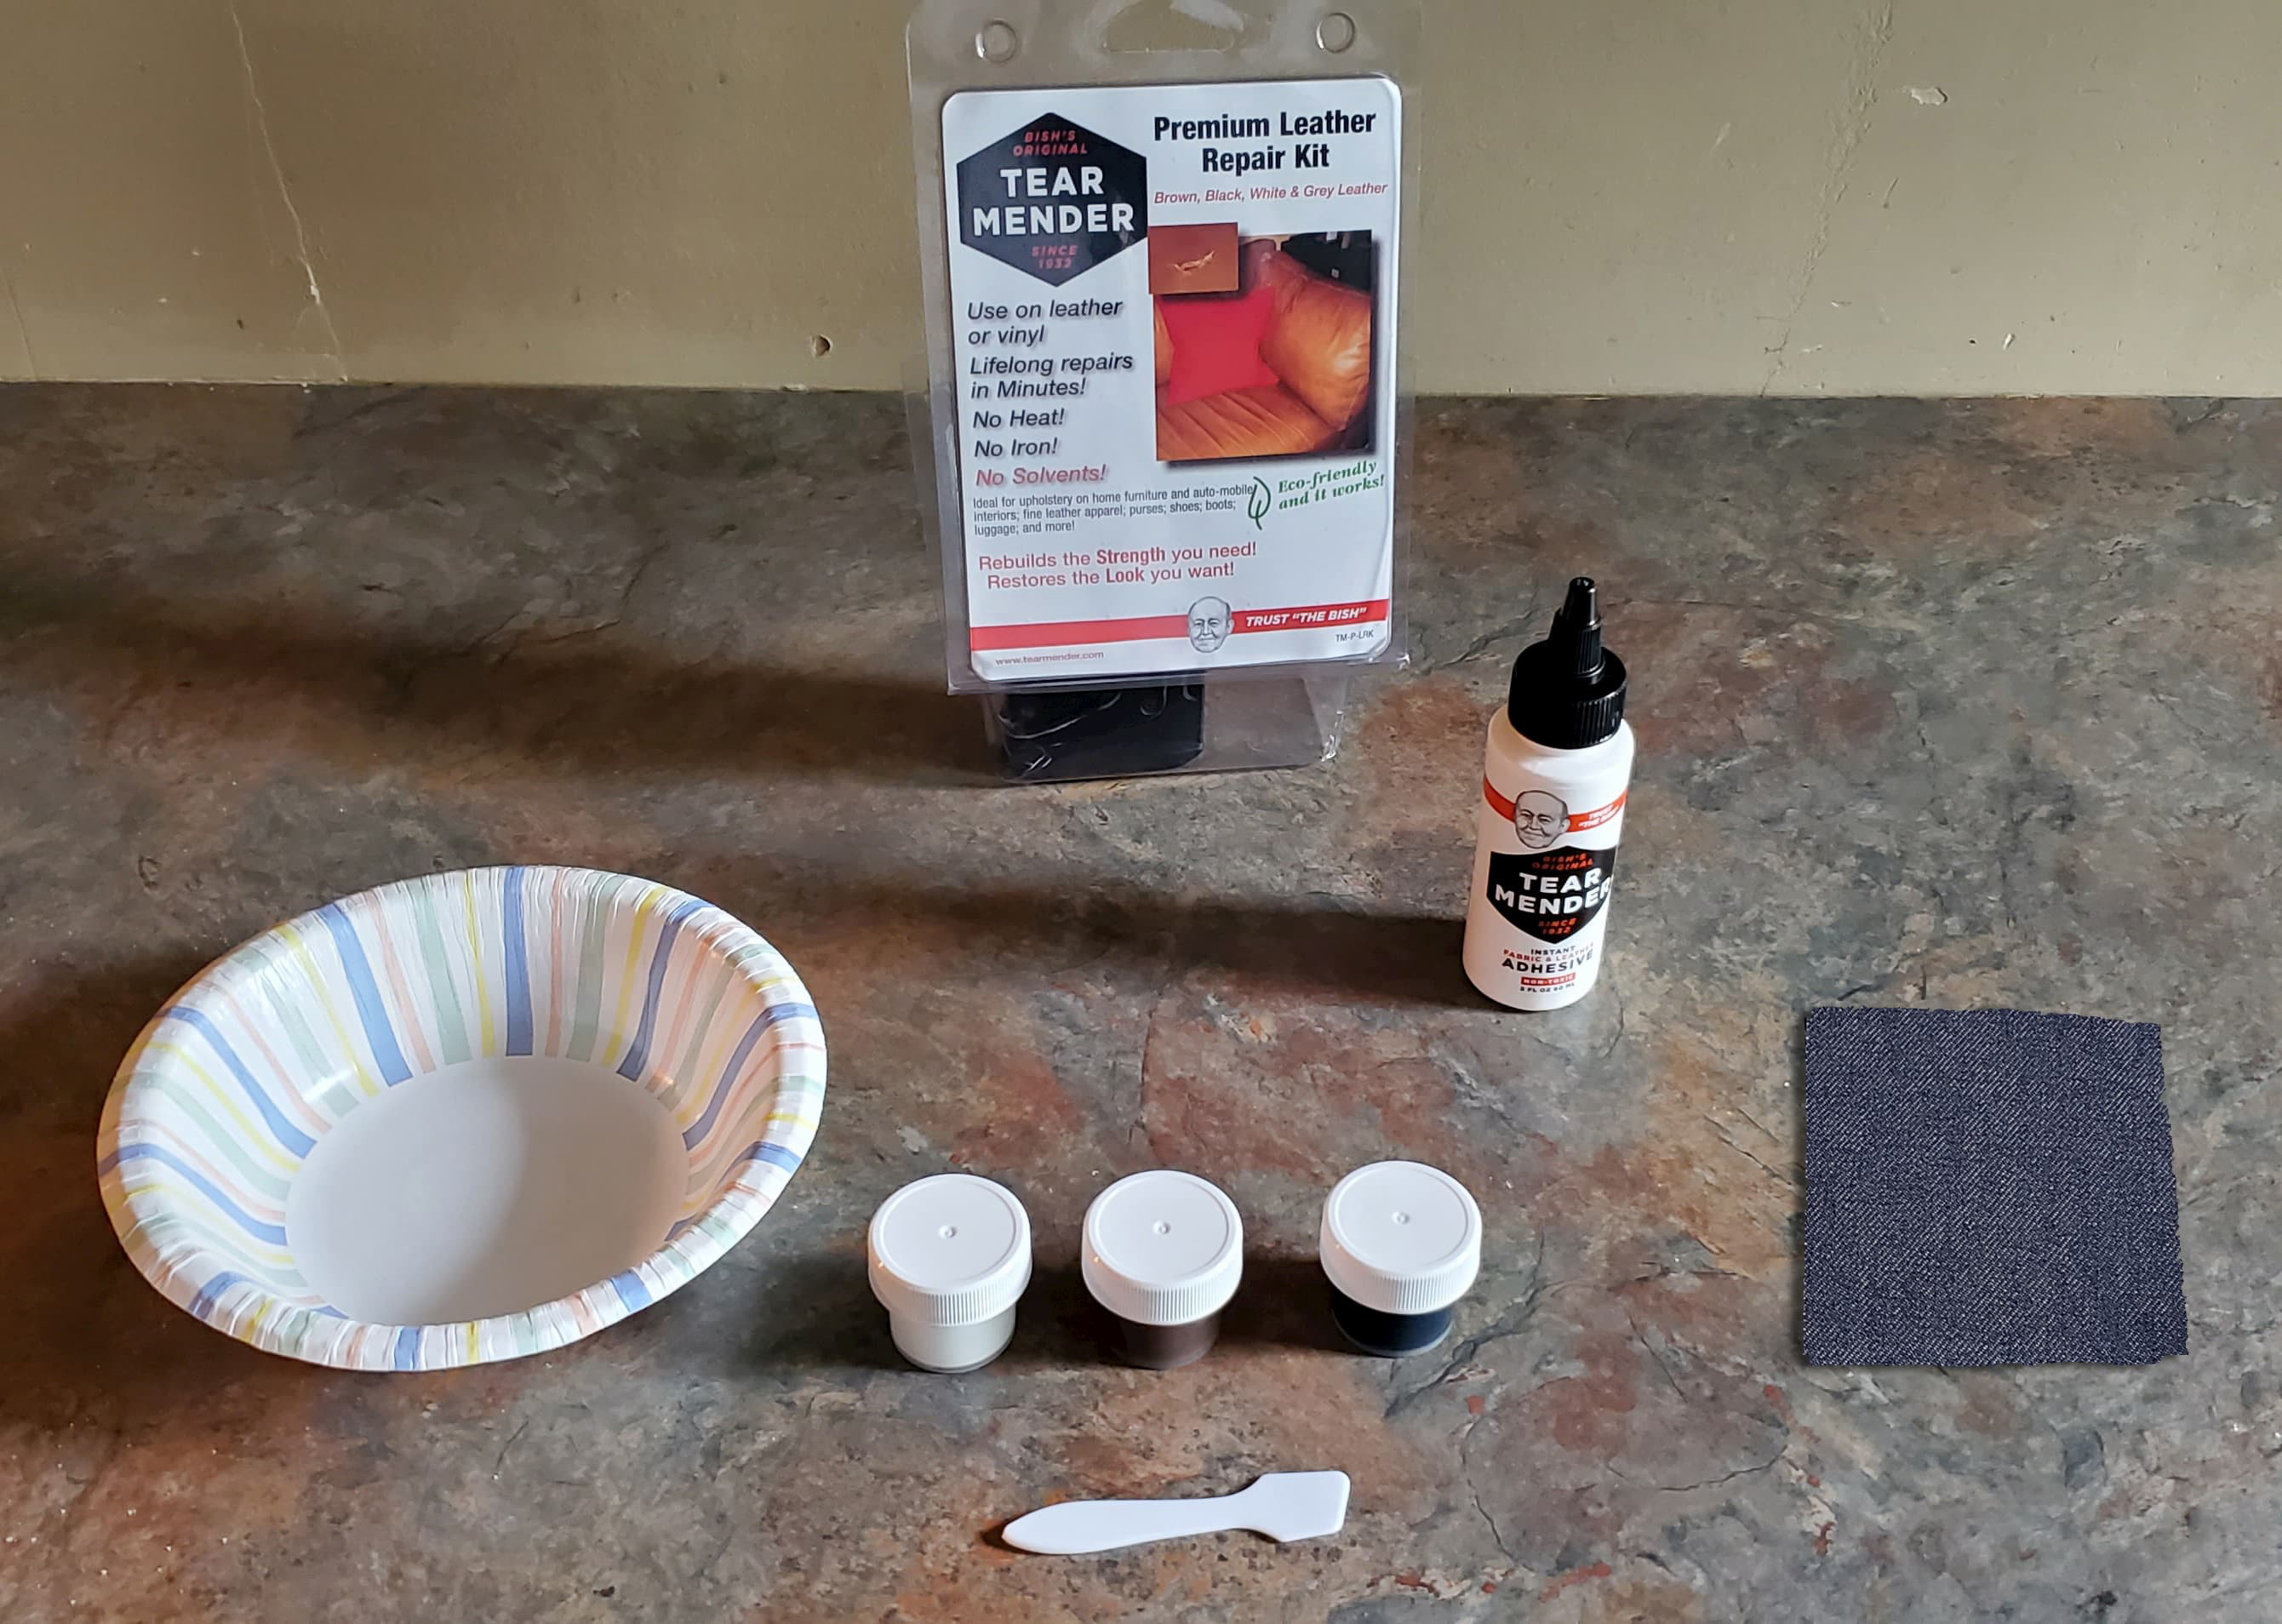 The Leather Repair Kit Comes With Tear Mender Adhesive, Color Compounds And Patch Fabric